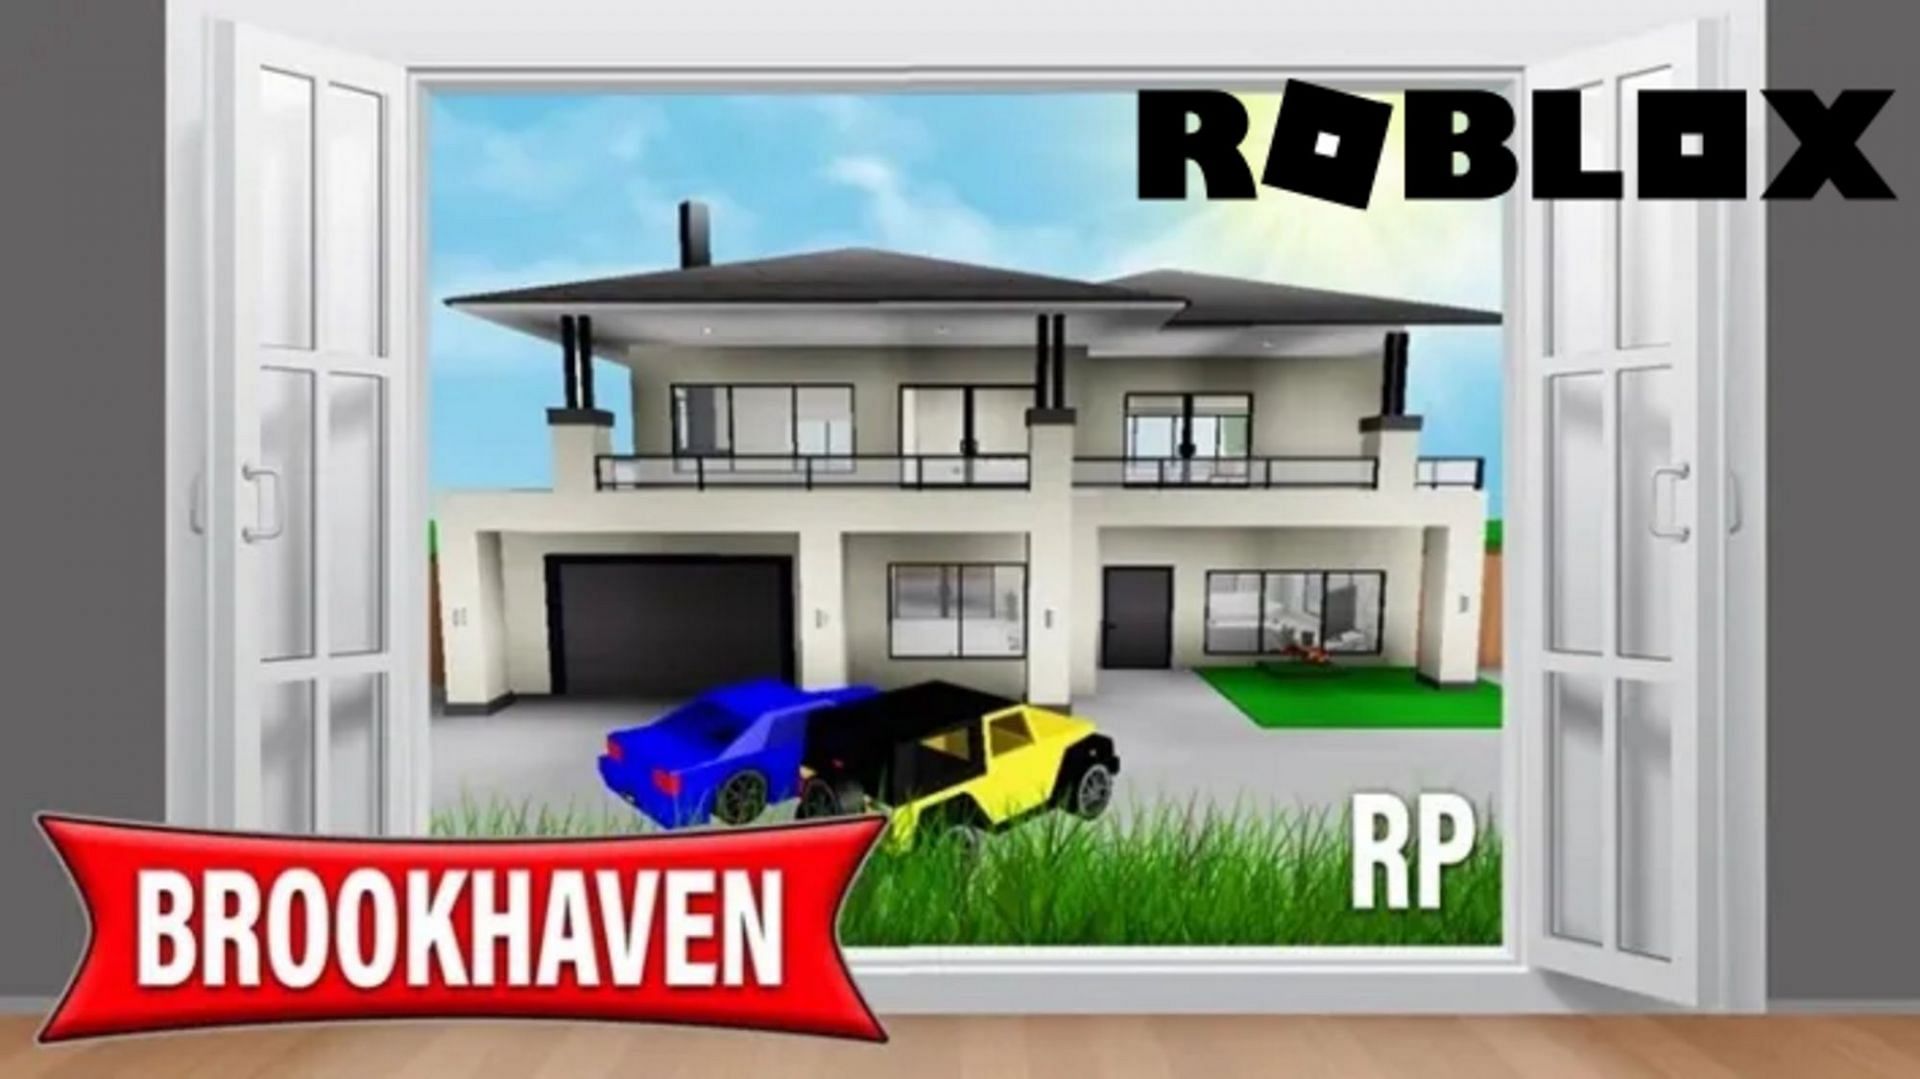 Top 5 vehicles to use in Roblox Brookhaven